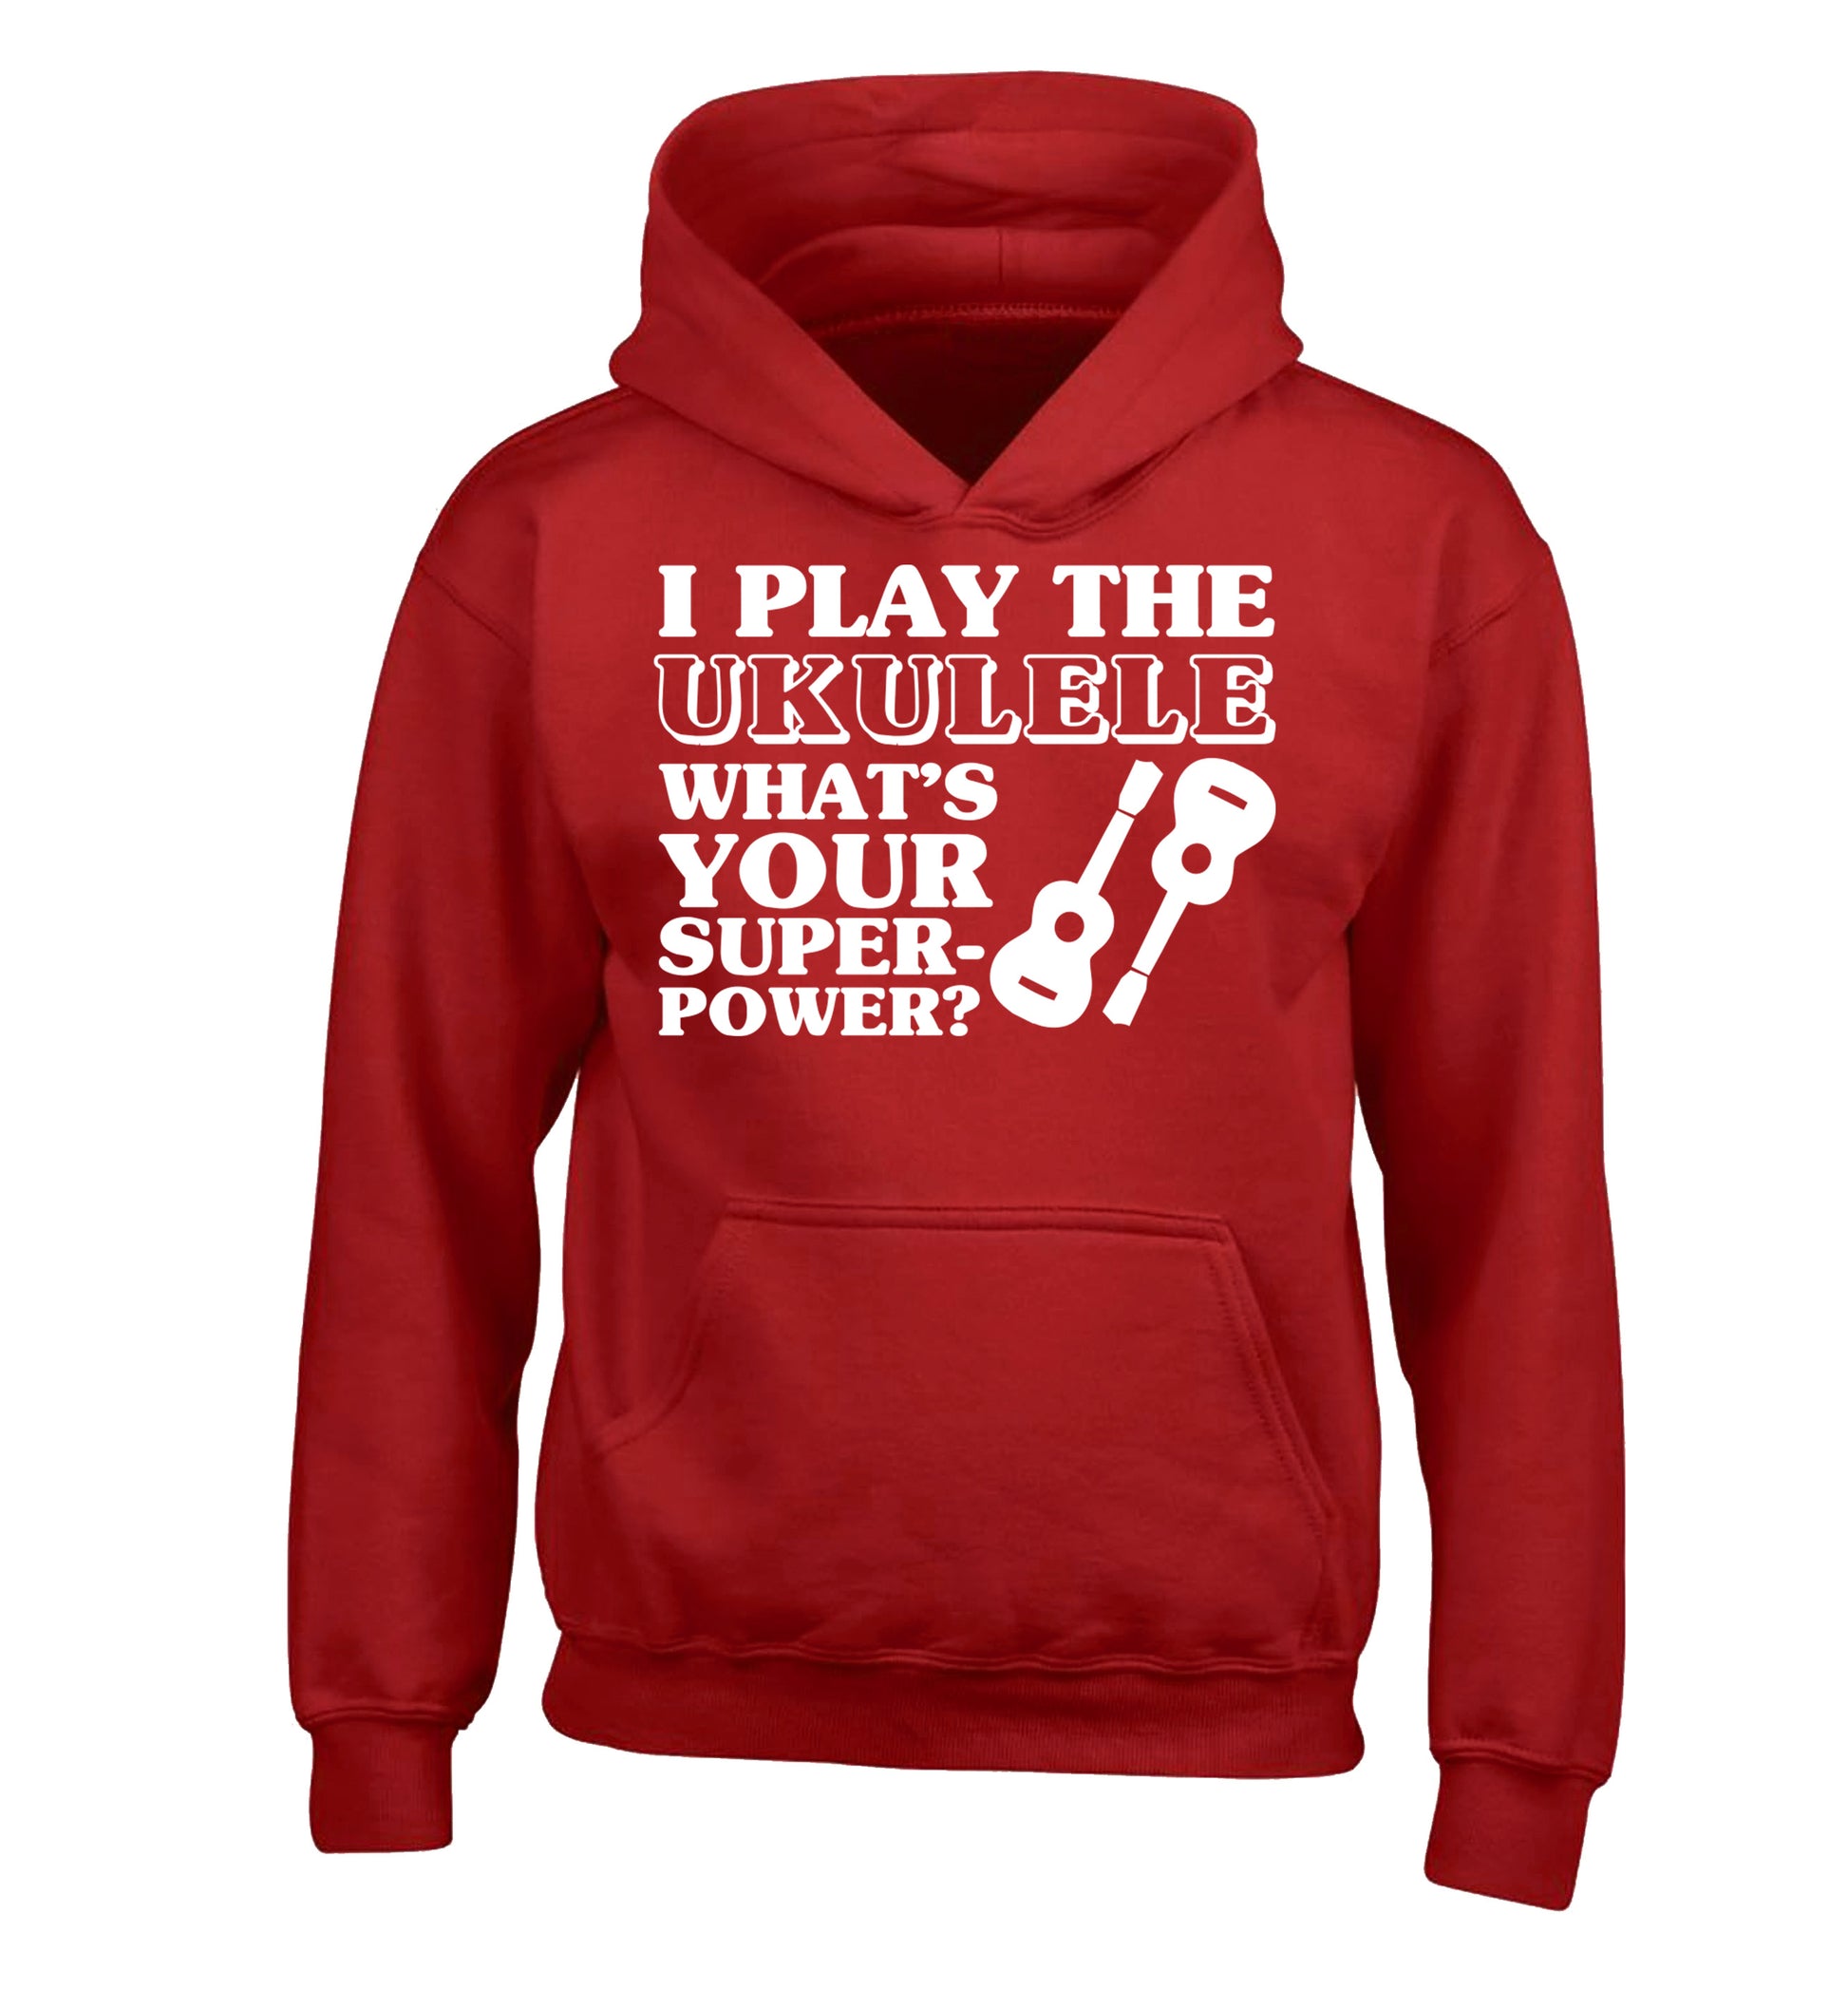 I play the ukulele what's your superpower? children's red hoodie 12-14 Years